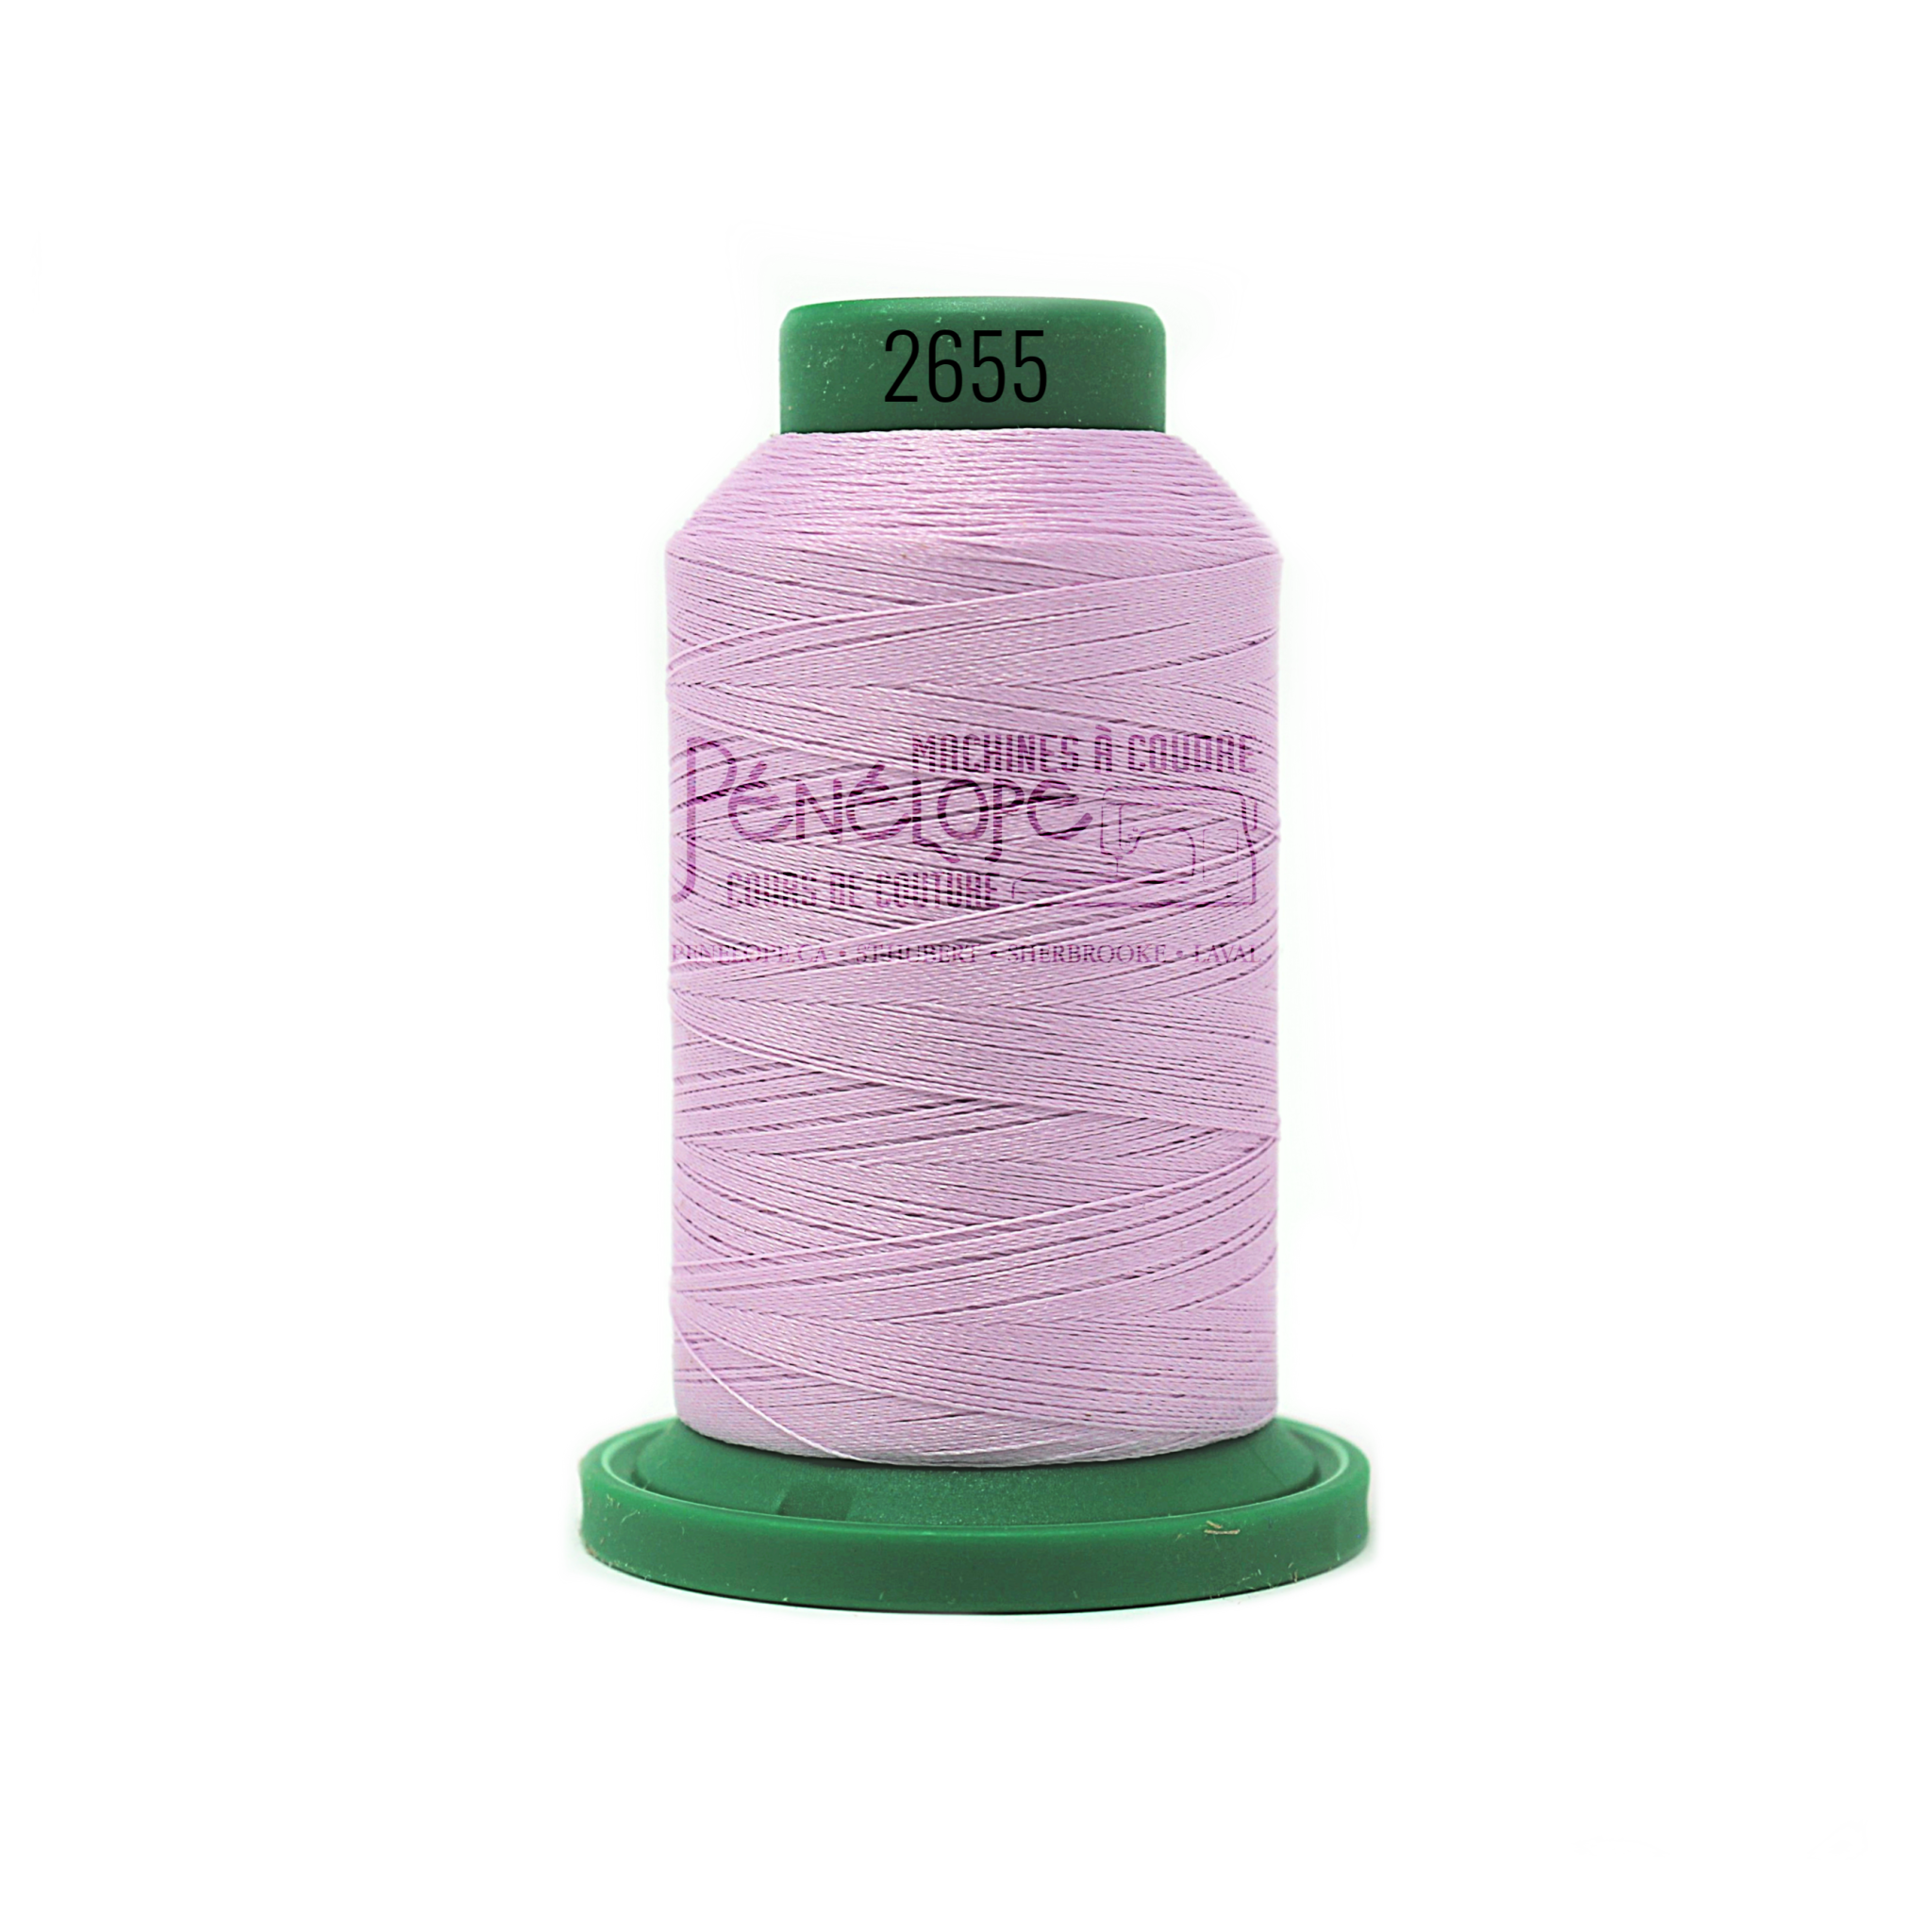 Isacord Isacord sewing and embroidery thread 2655